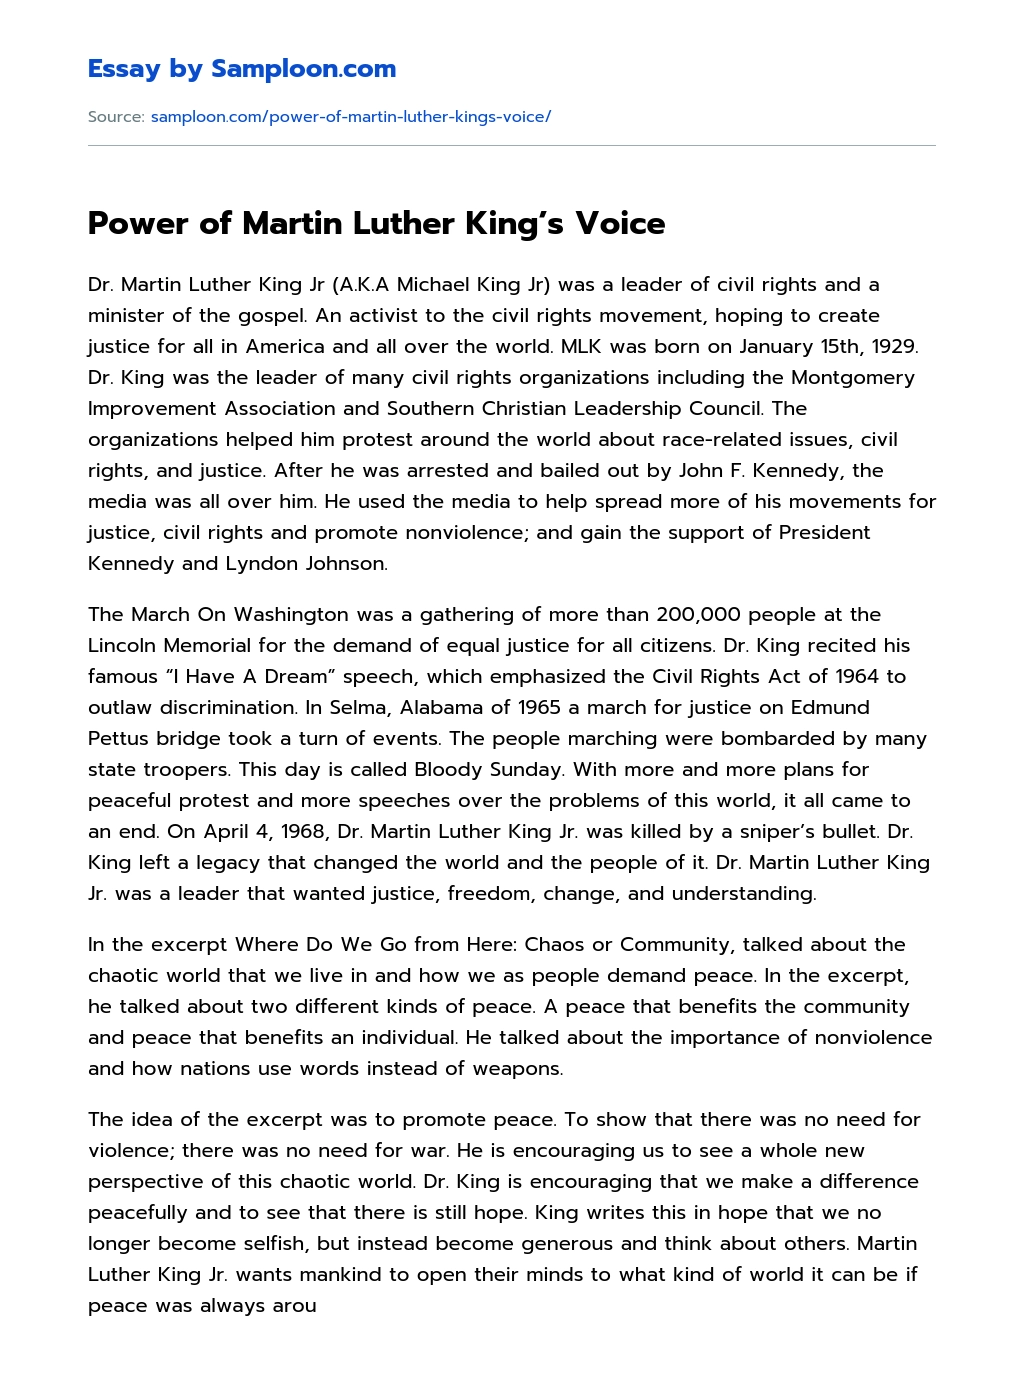 Power of Martin Luther King’s Voice essay